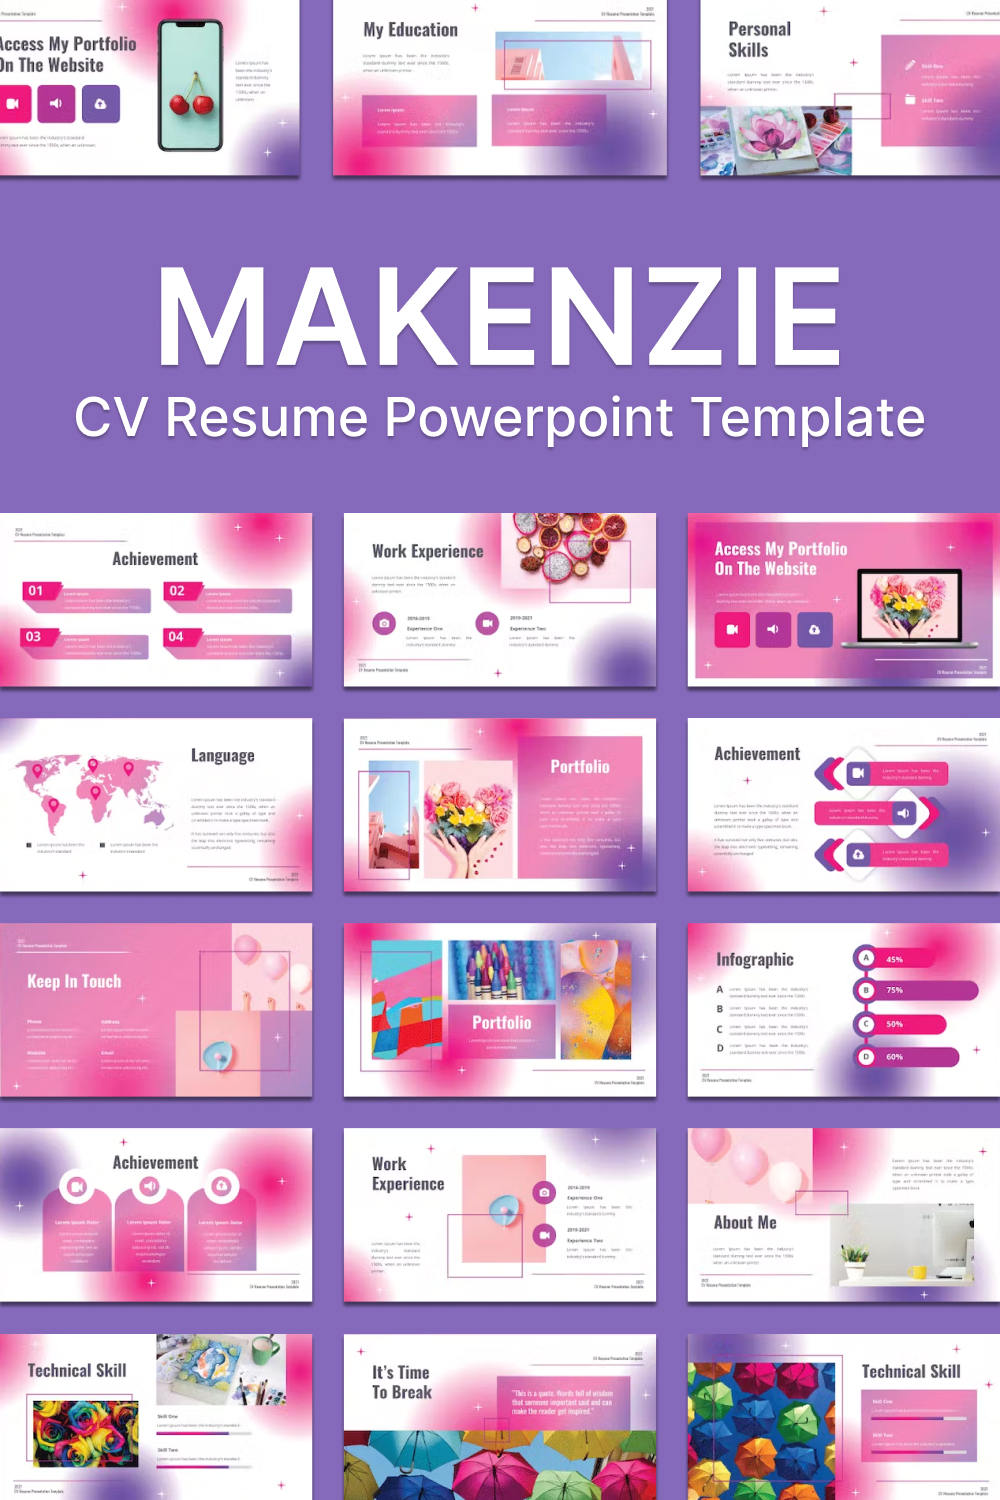 Resume powerpoint template of pinterest.